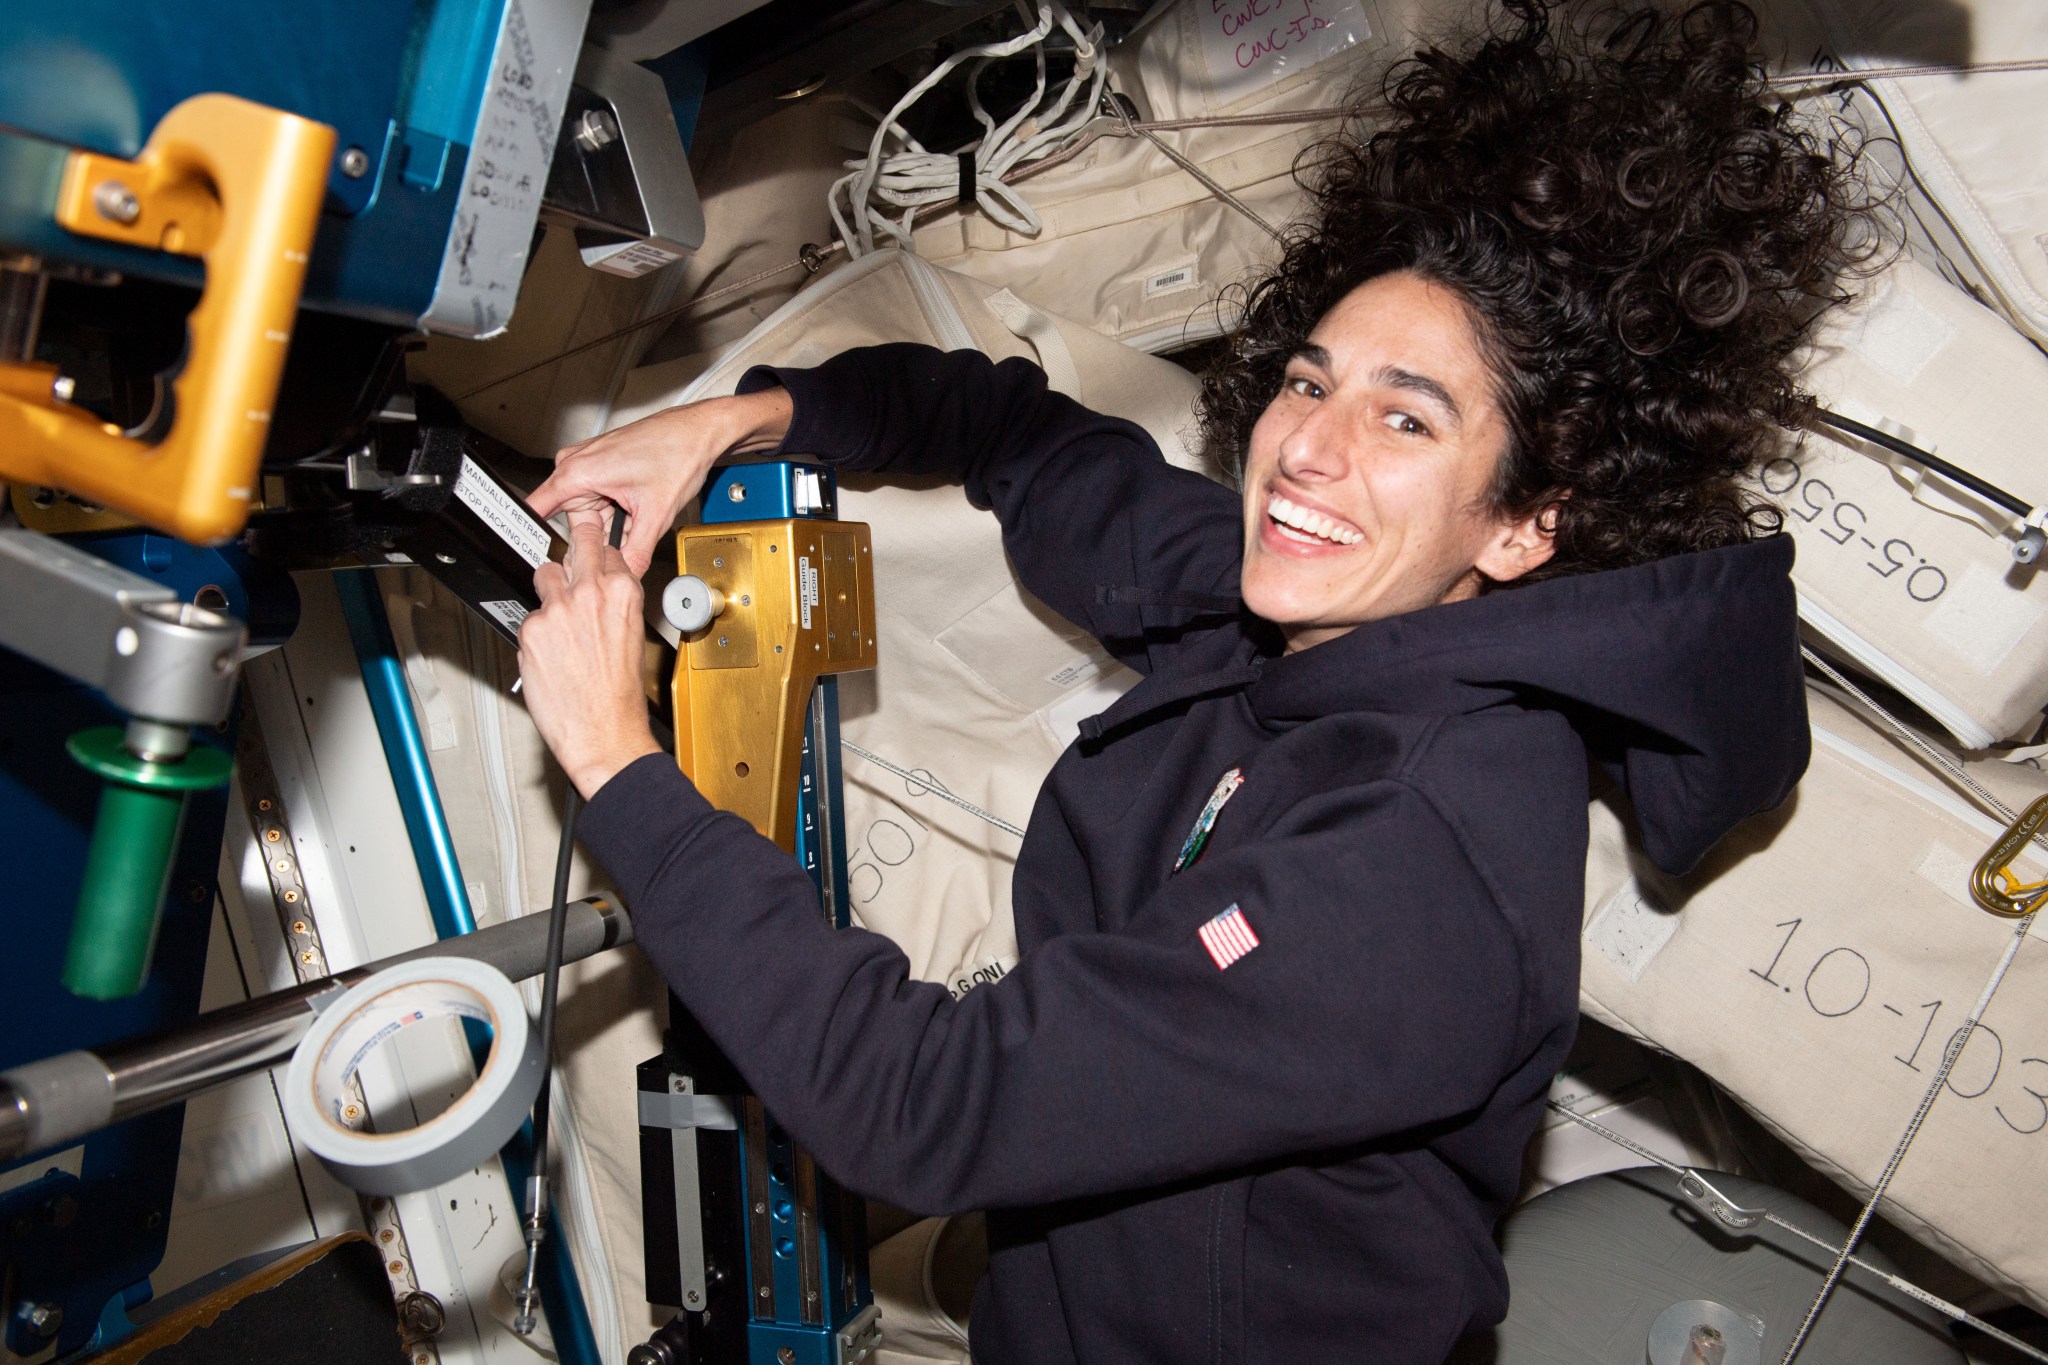 iss070e001602 (Oct. 2, 2023) -- NASA astronaut and Expedition 70 Flight Engineer Jasmin Moghbeli works with the Advanced Resistive Exercise Device, or ARED, removing and replacing cables. The device uses adjustable resistive mechanisms to provide crew members a weight load while exercising to maintain muscle strength and mass in microgravity.